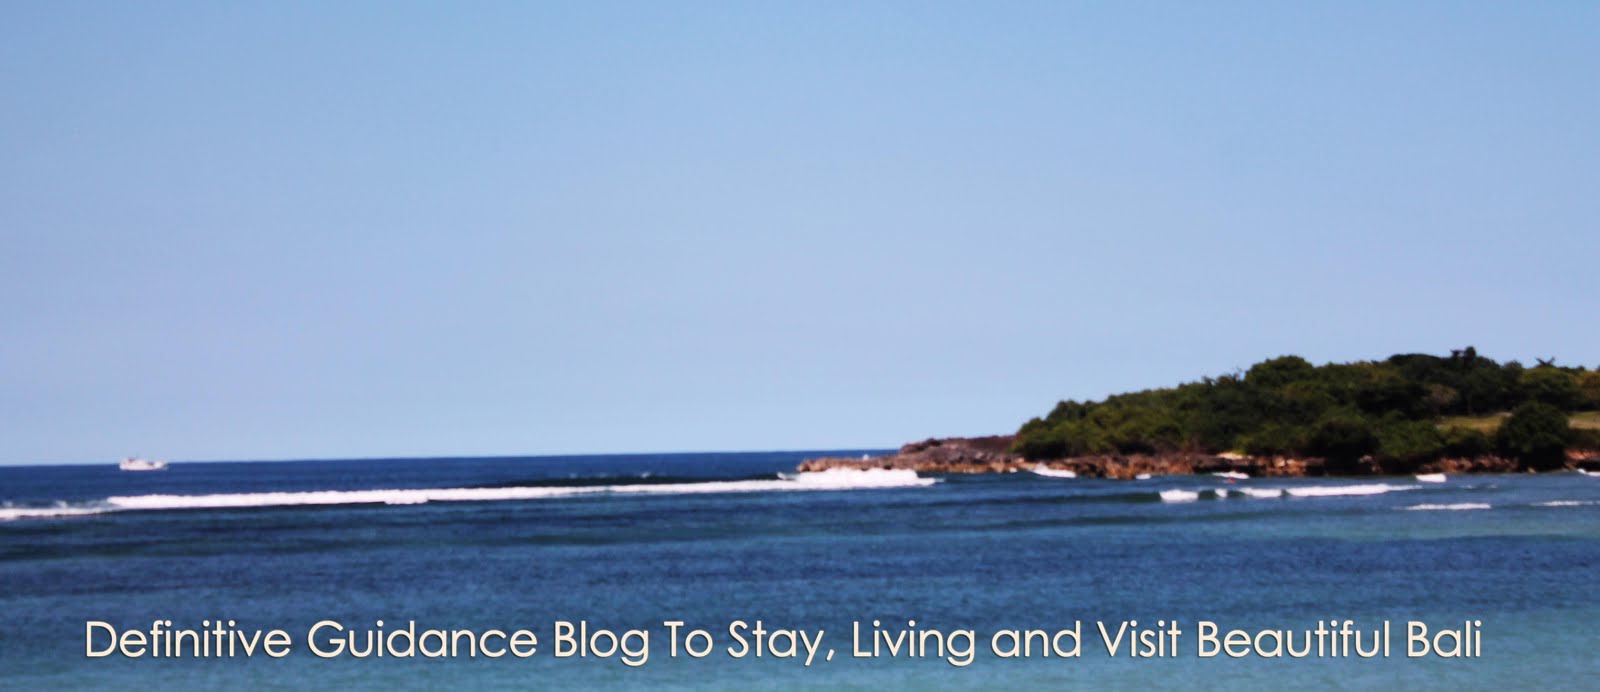 Definitive Guidance Blog To Stay, Living and Visit Beautiful Bali